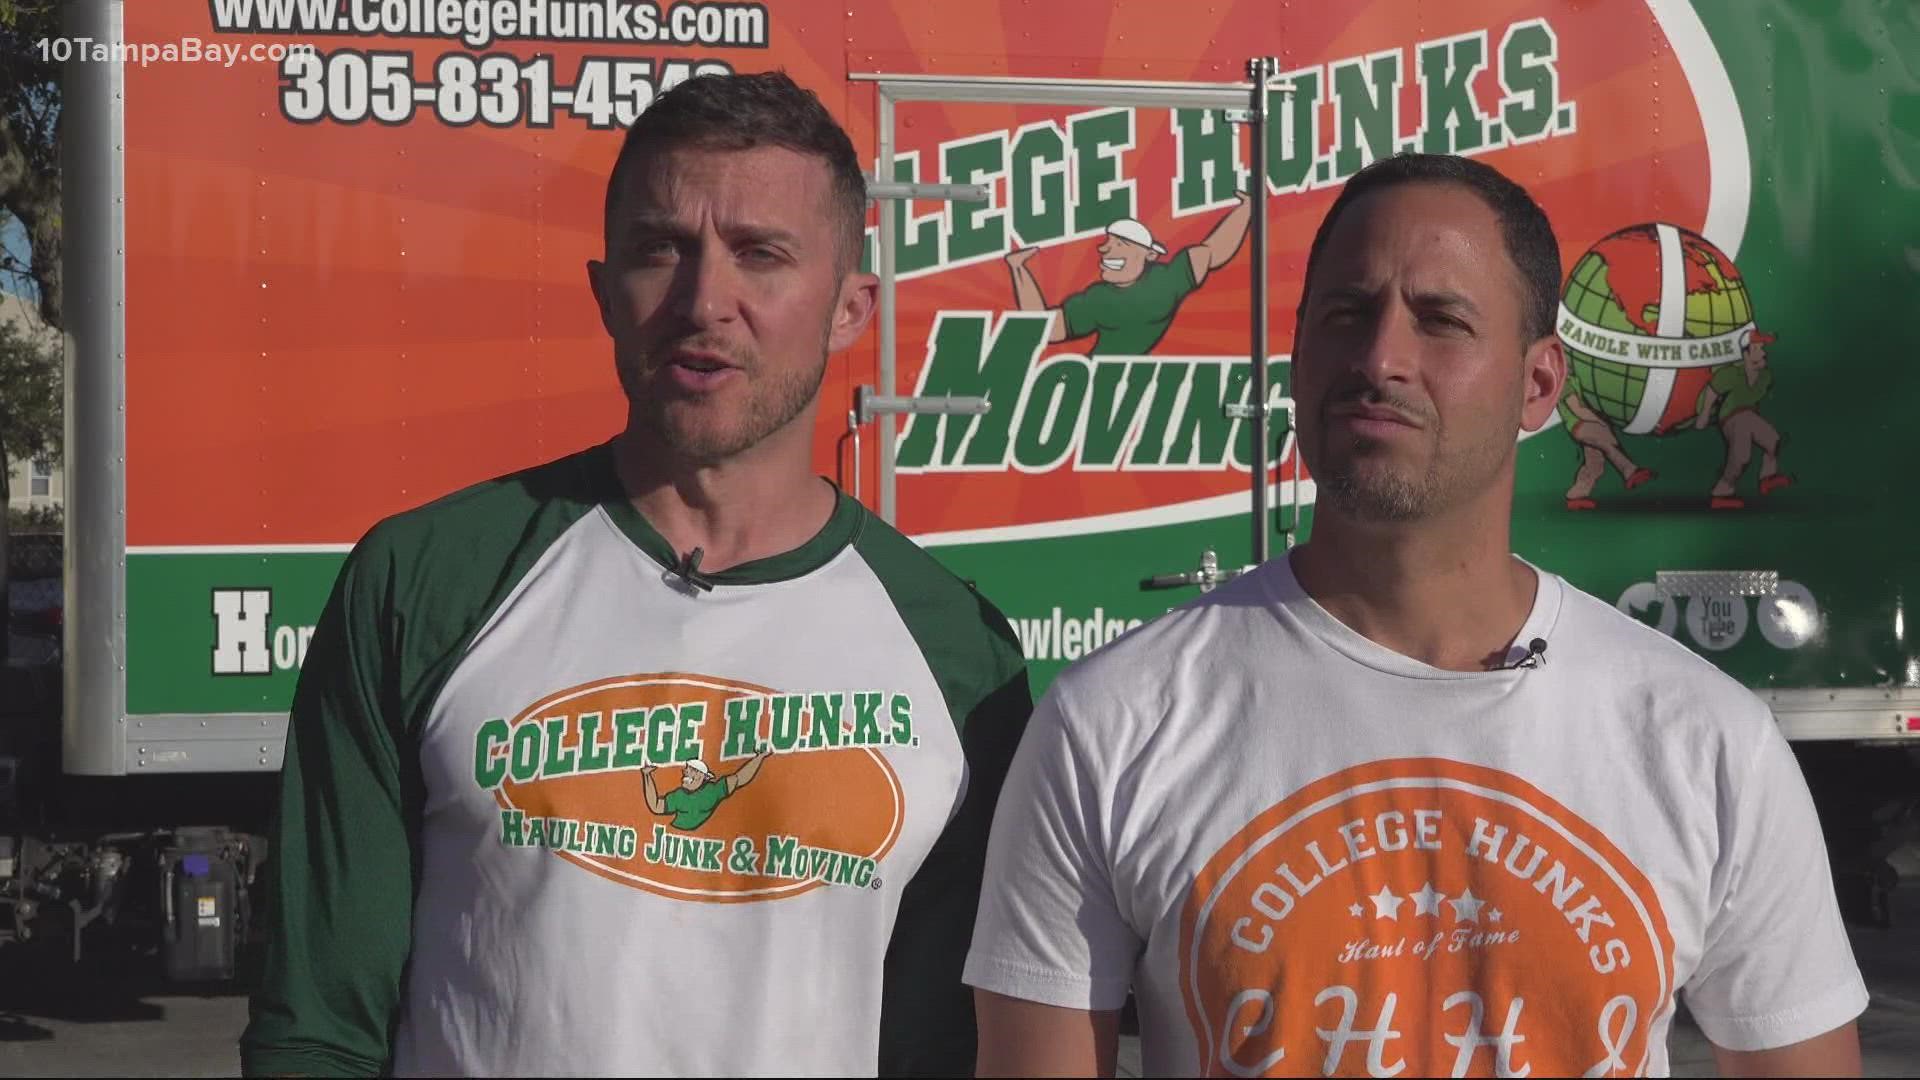 College Hunks Hauling Junk & Moving Undercover Boss